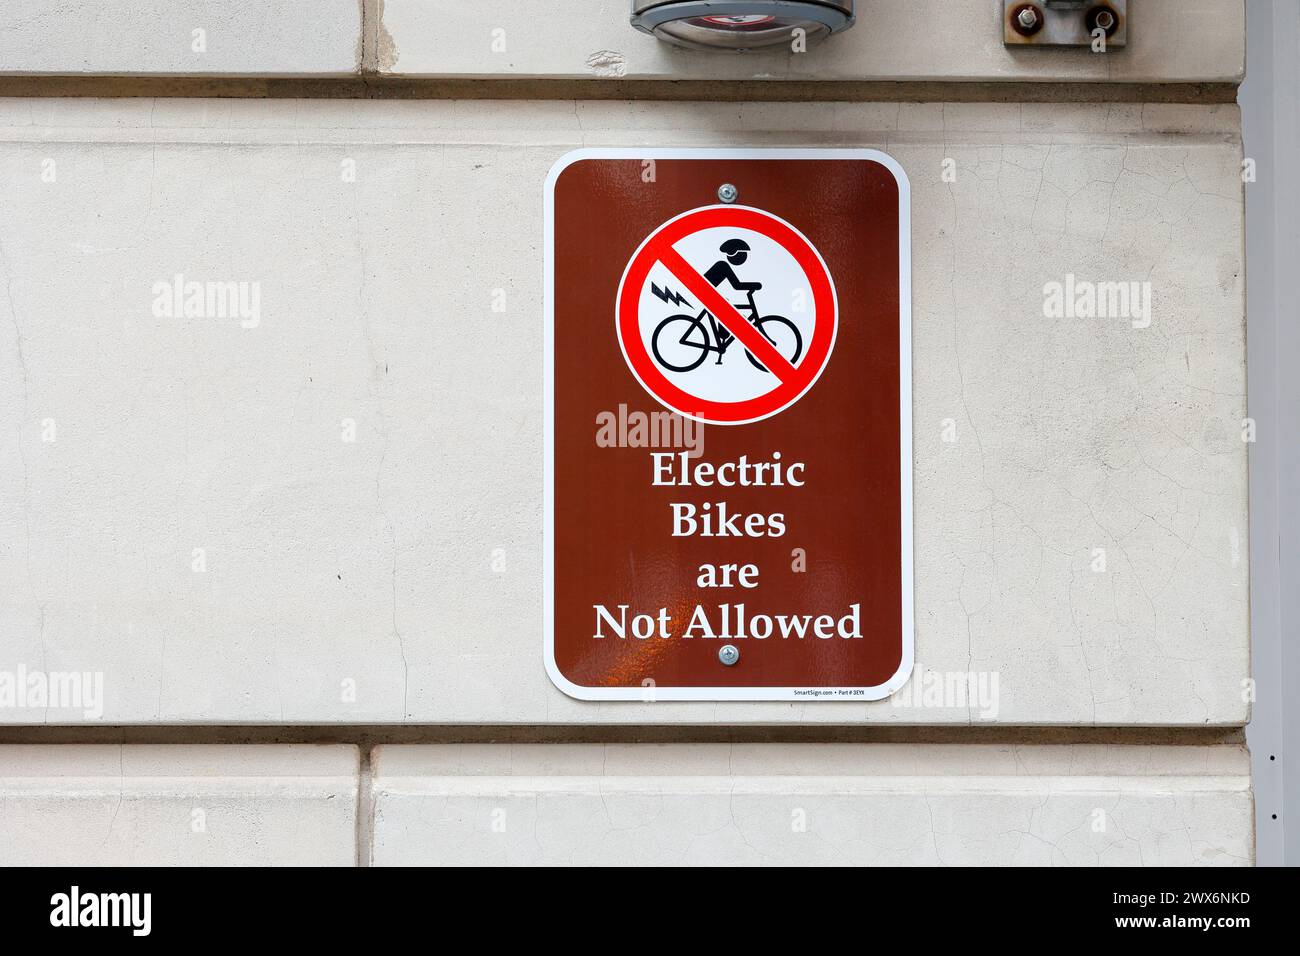 Electric Bikes Are Not Allowed sign signage on a wall Stock Photo